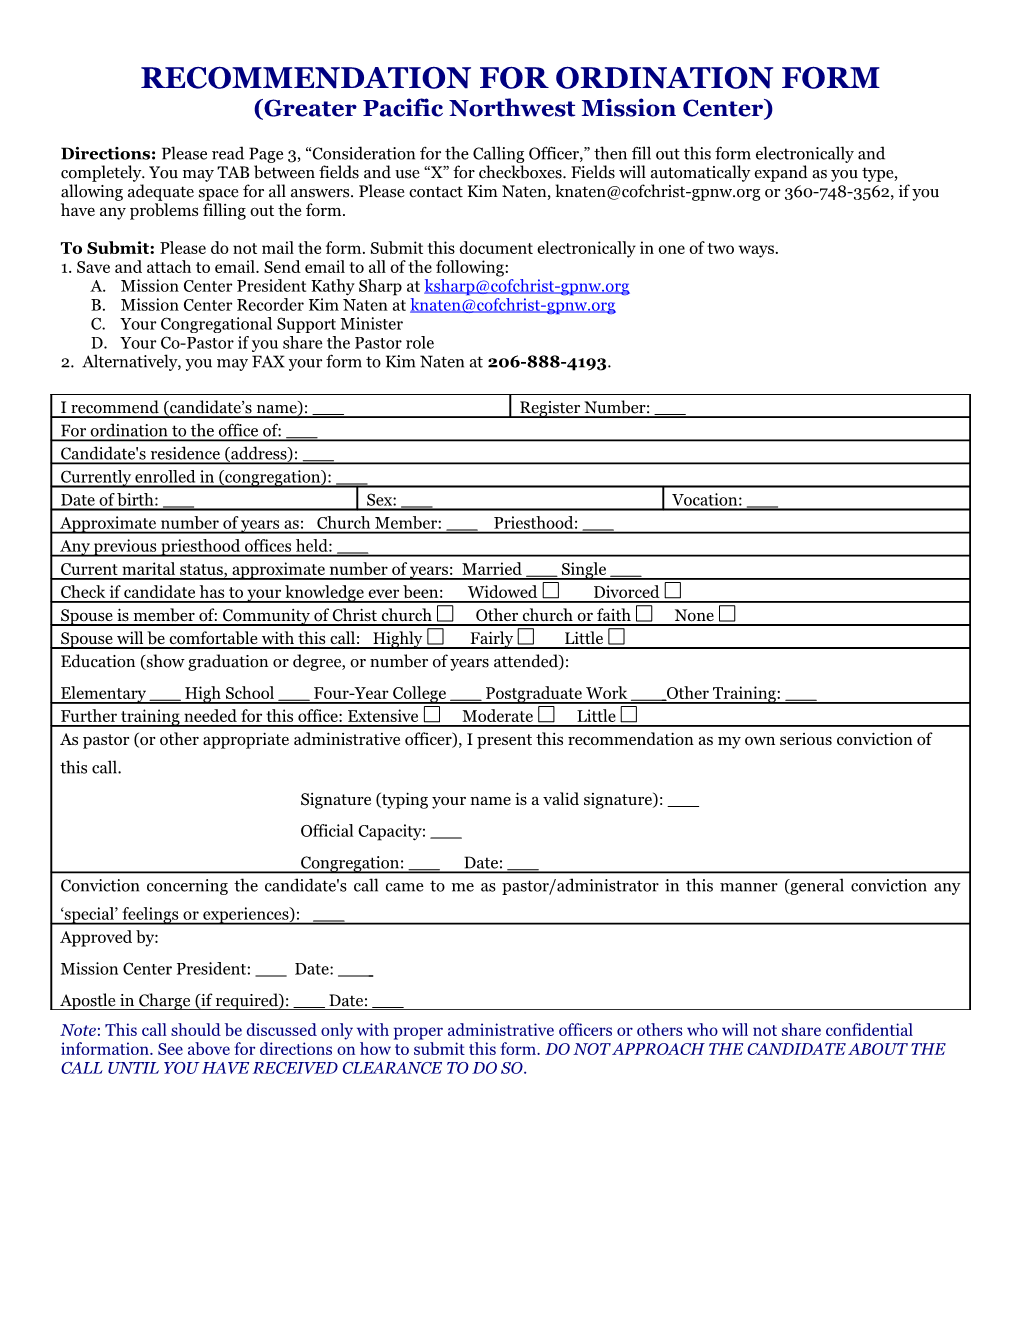 Recommendation for Ordination Form